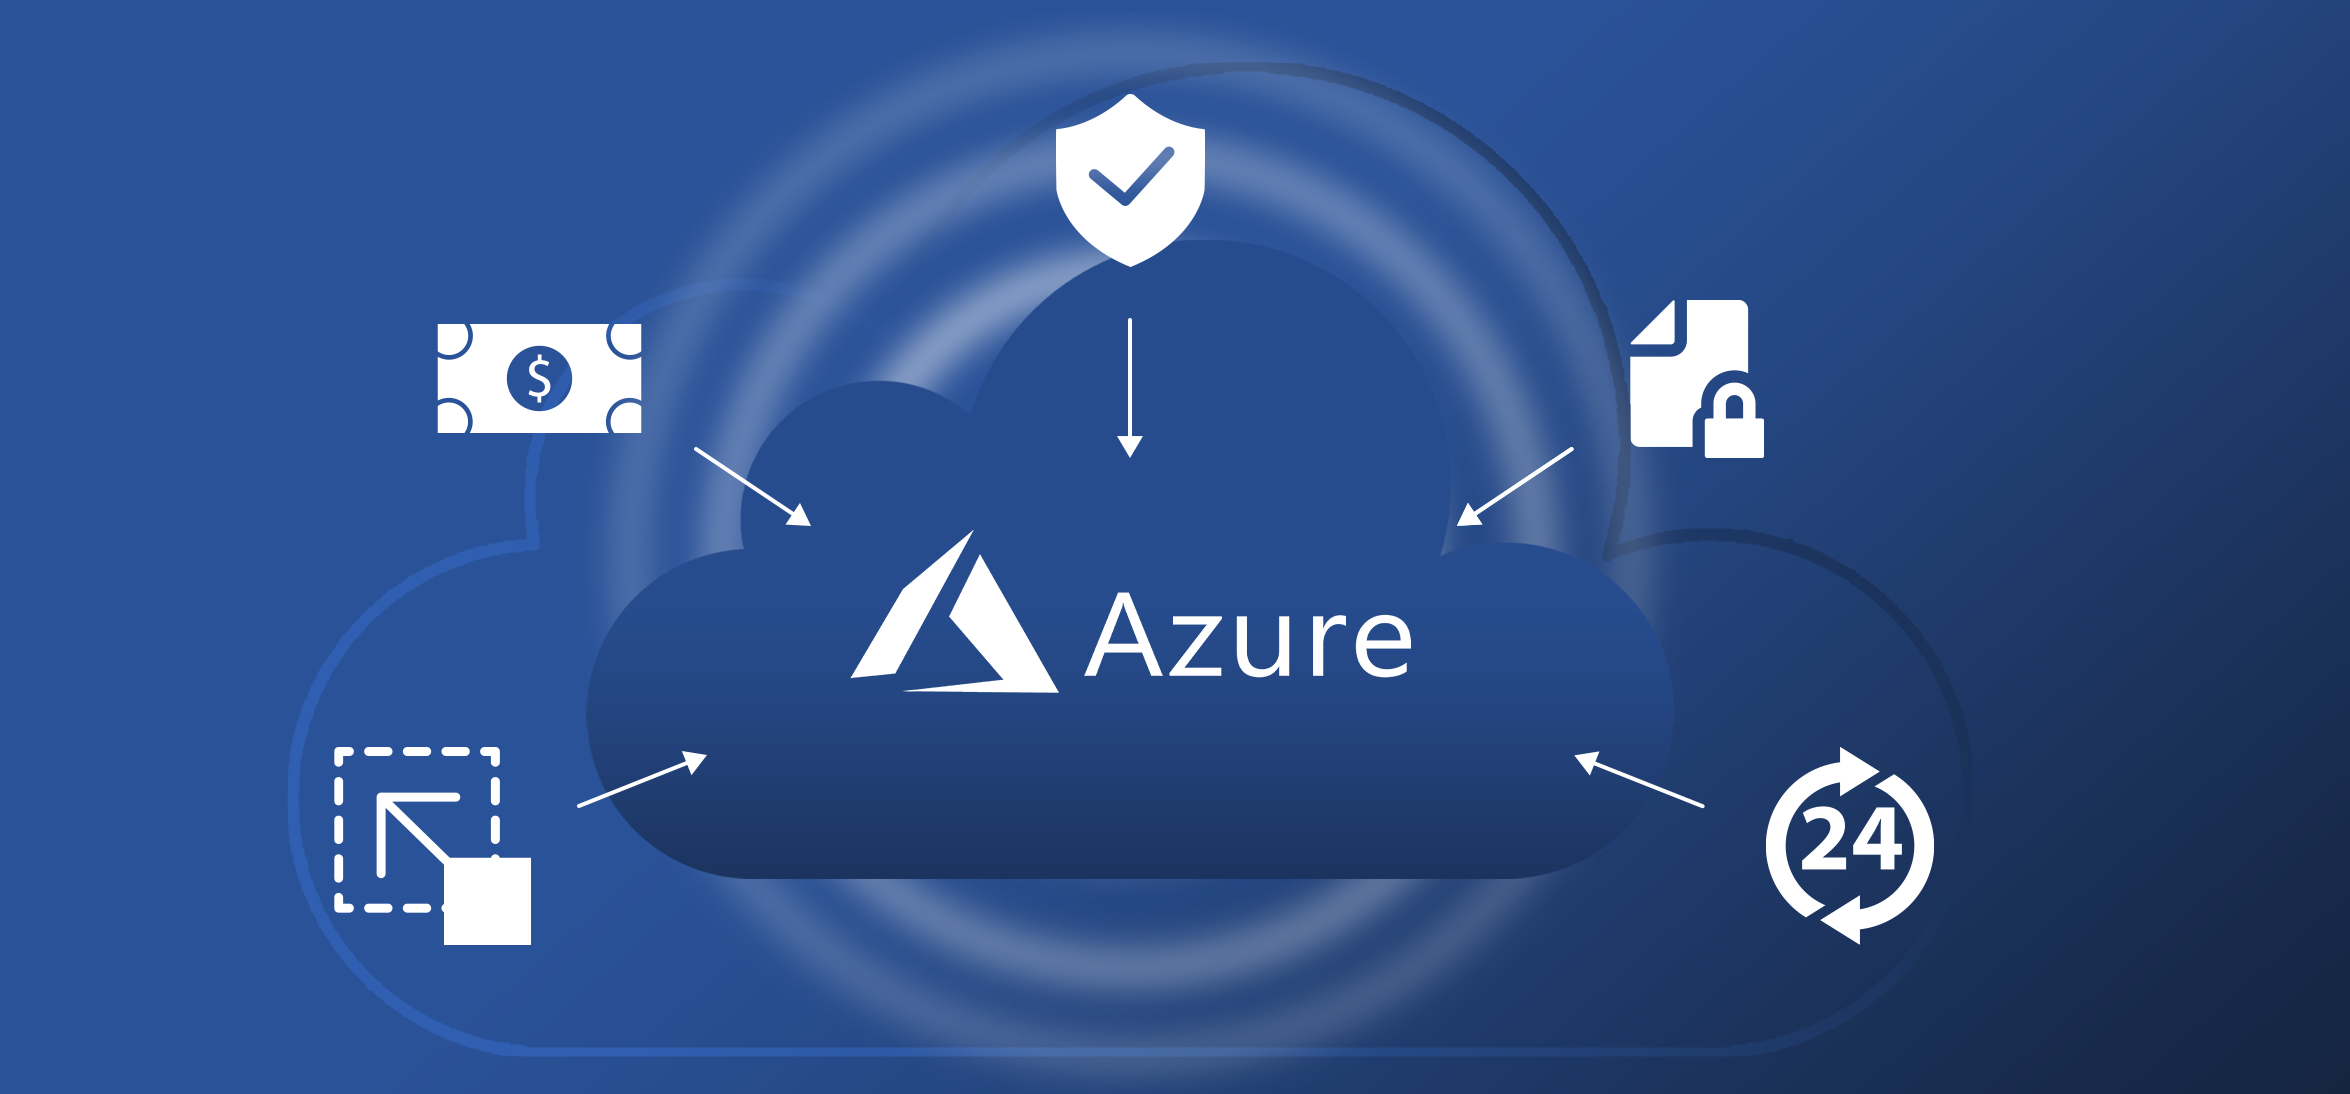 Microsoft Azure Administration and Consulting Services in Bonita CA, 91908